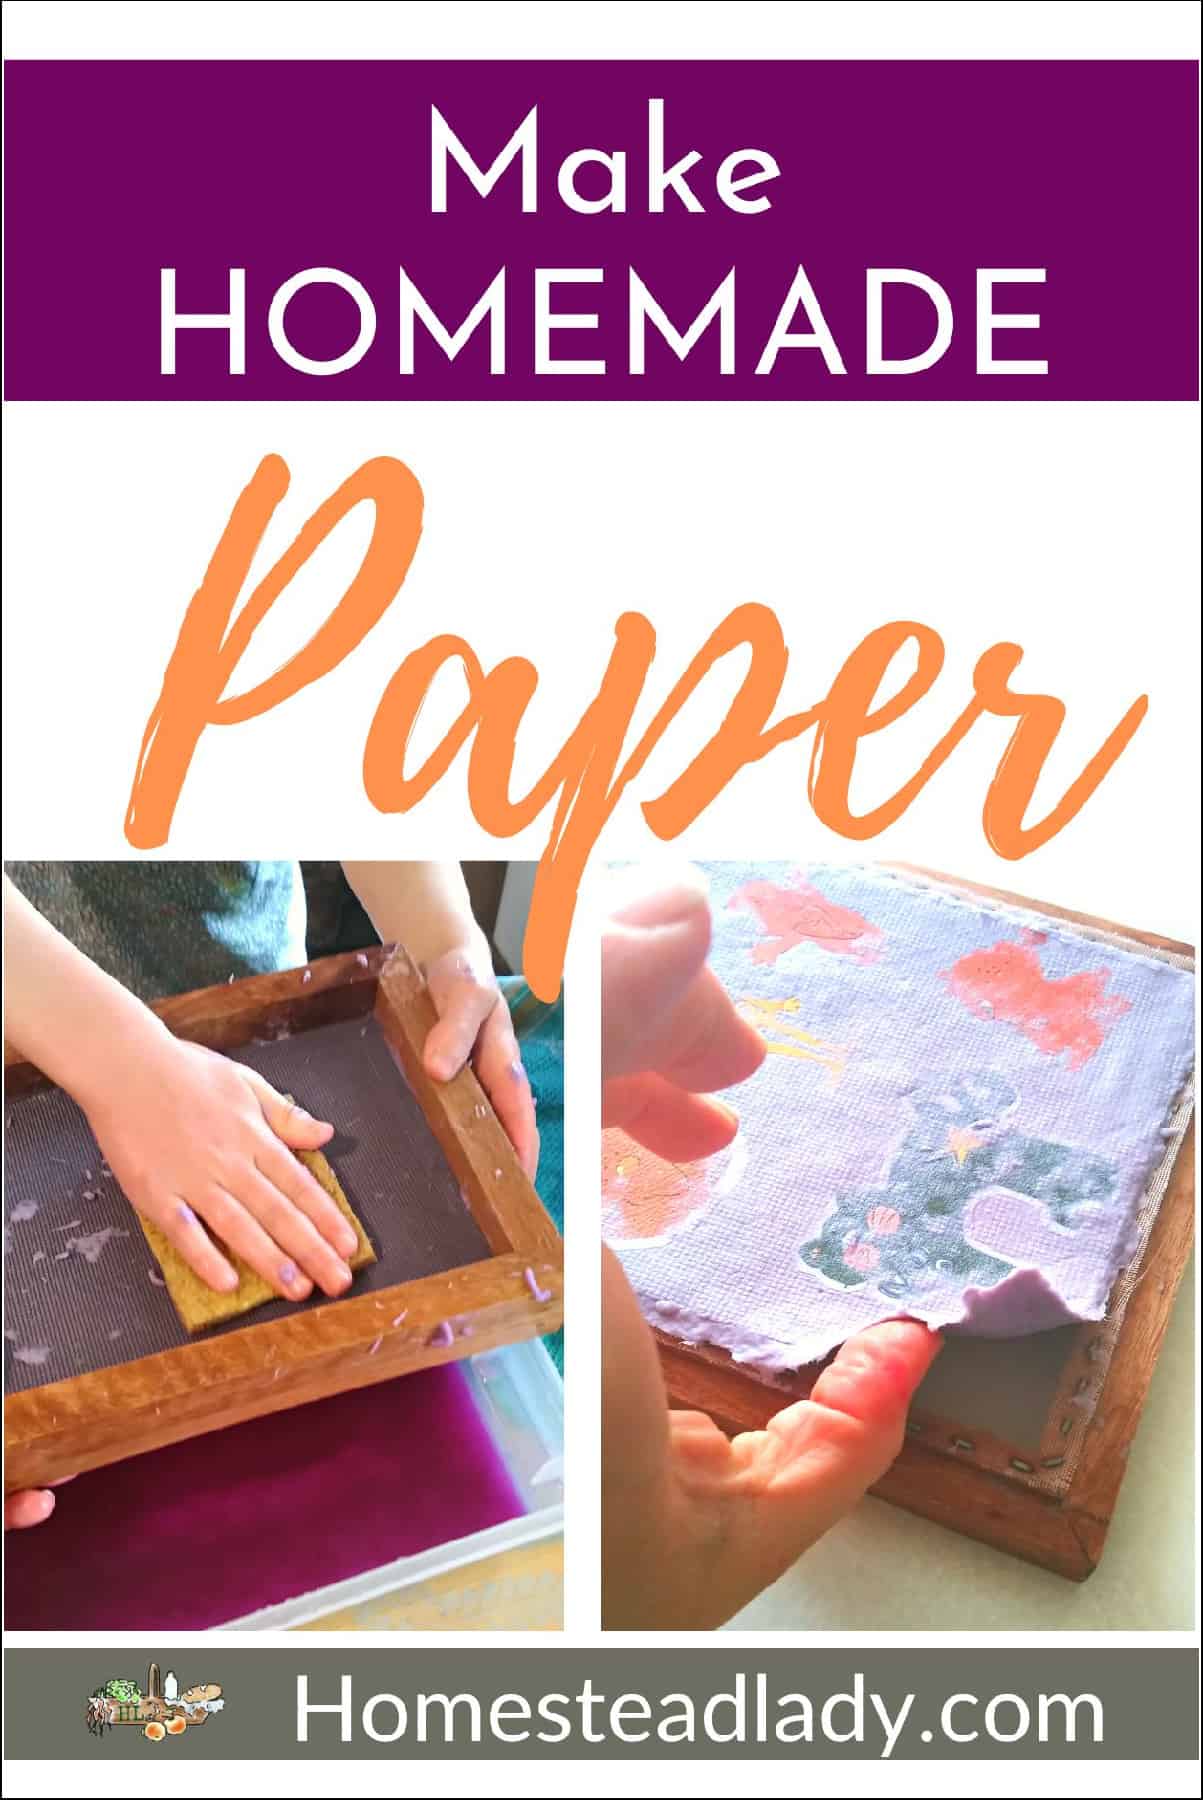 Papermaking Kit, Homemade Paper, Recycled Paper, Diy Kits for